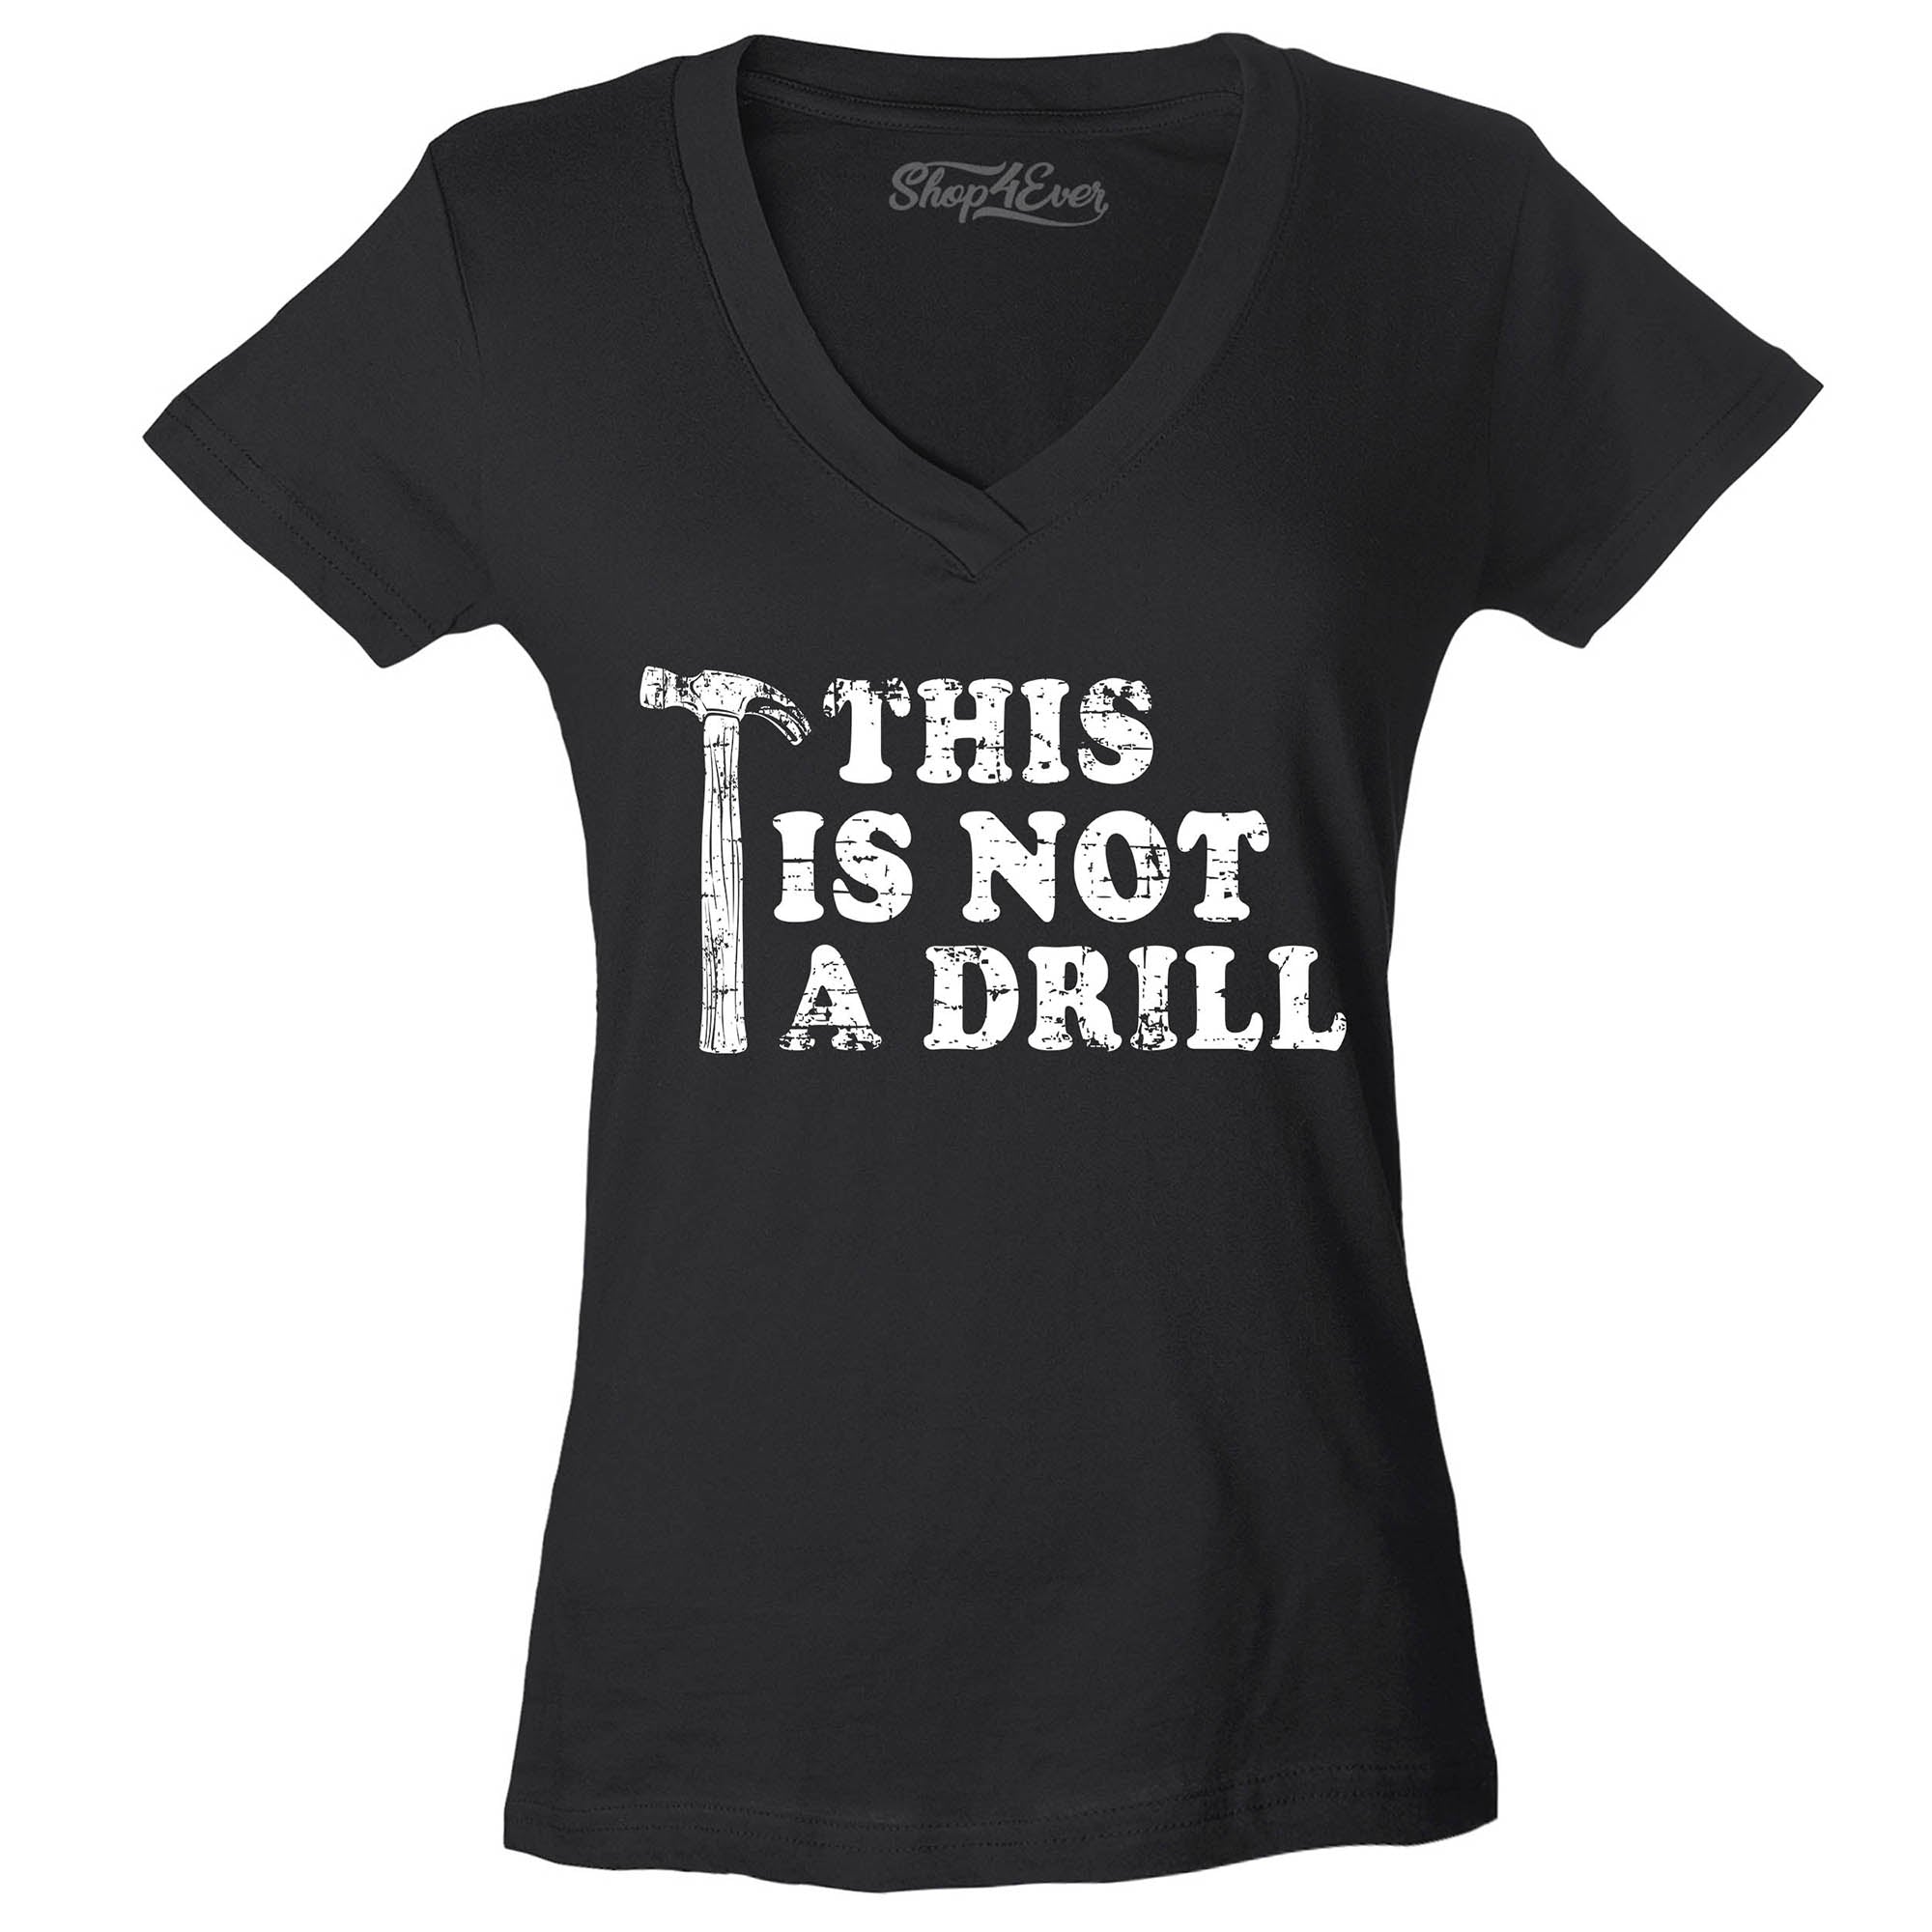 This is Not a Drill Women's V-Neck T-Shirt Slim Fit